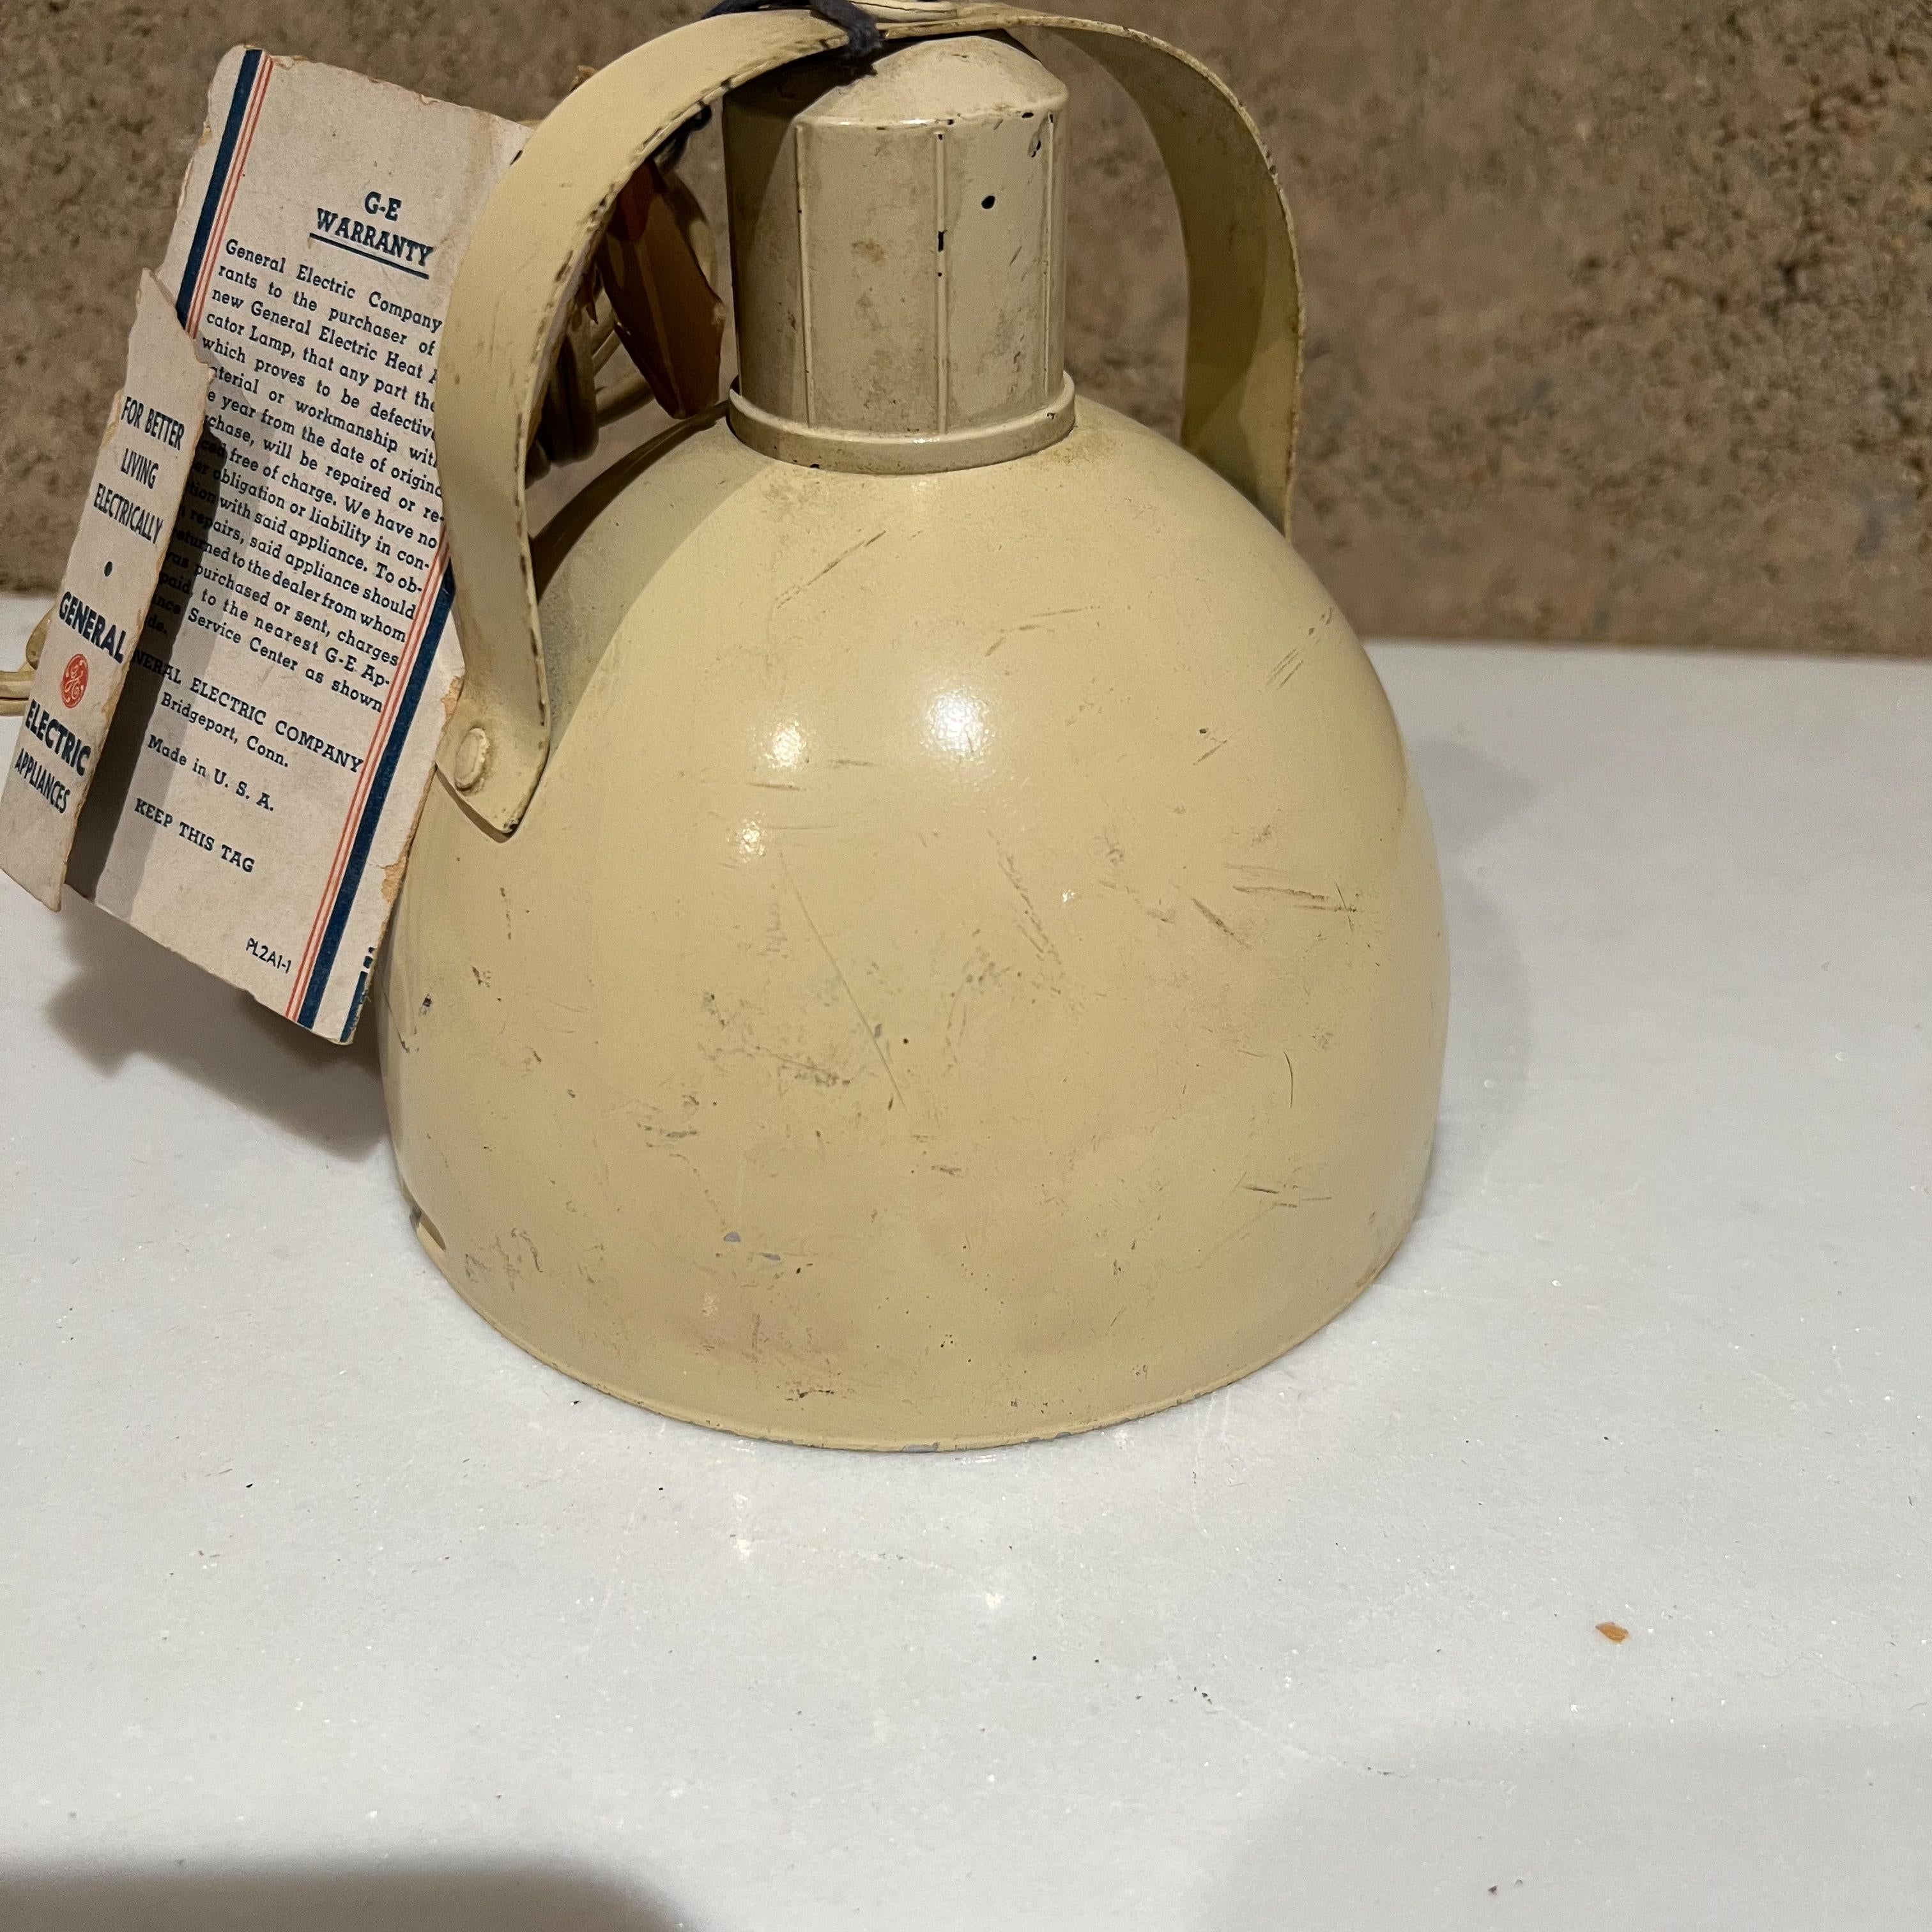 1950s Vintage GE General Electric Therapeutic Heat Applicator Lamp in Beige In Good Condition For Sale In Chula Vista, CA